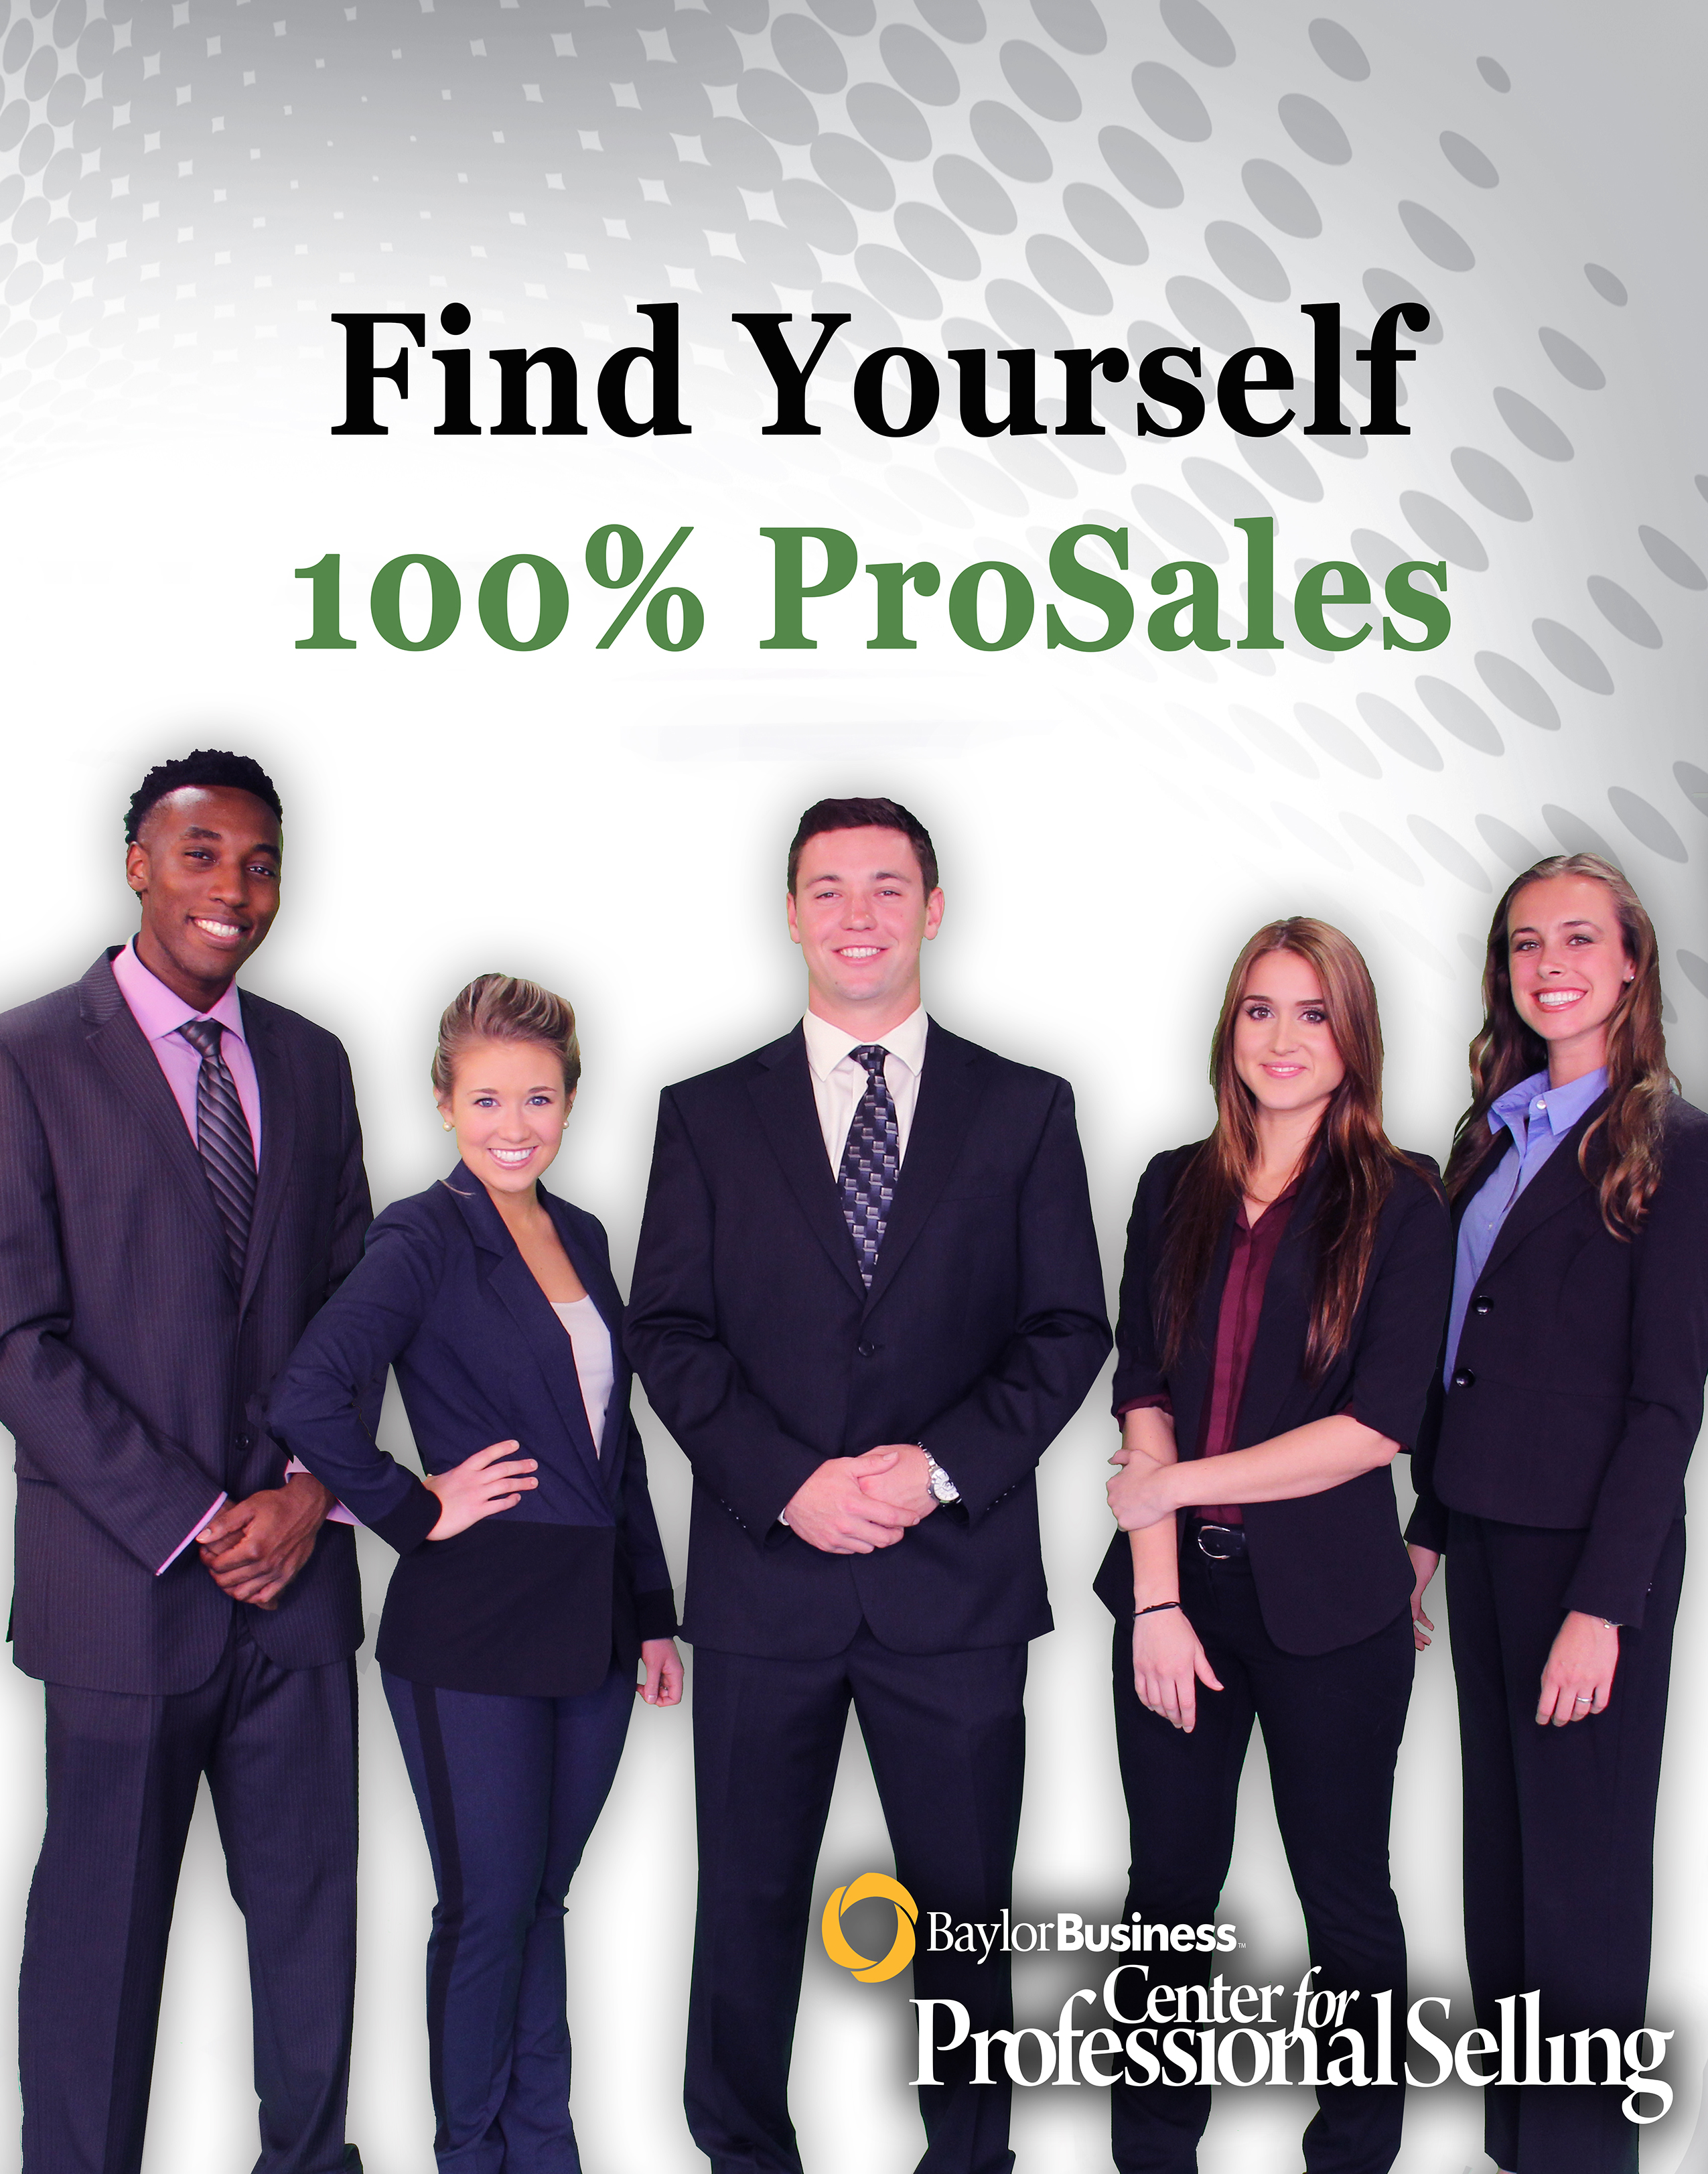 Find Yourself 100% ProSales Ad 2